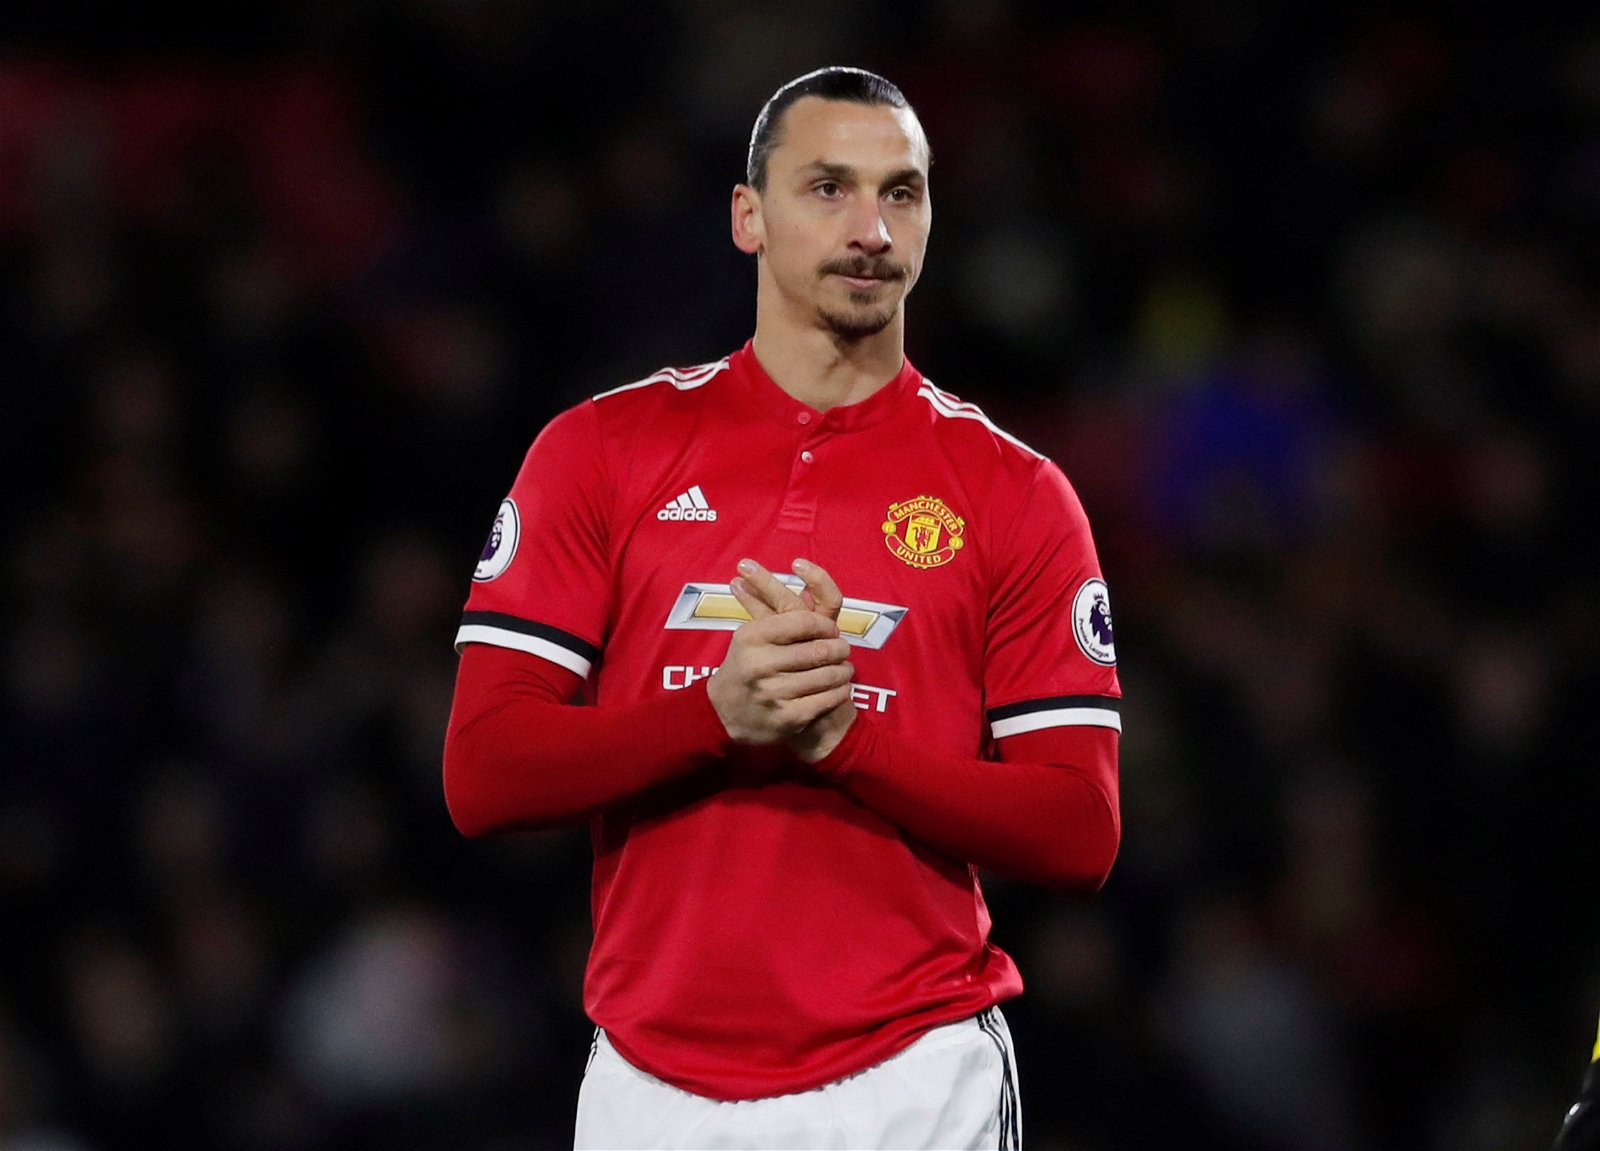 Why Manchester United pulled out of race to re-sign Zlatan Ibrahimovic